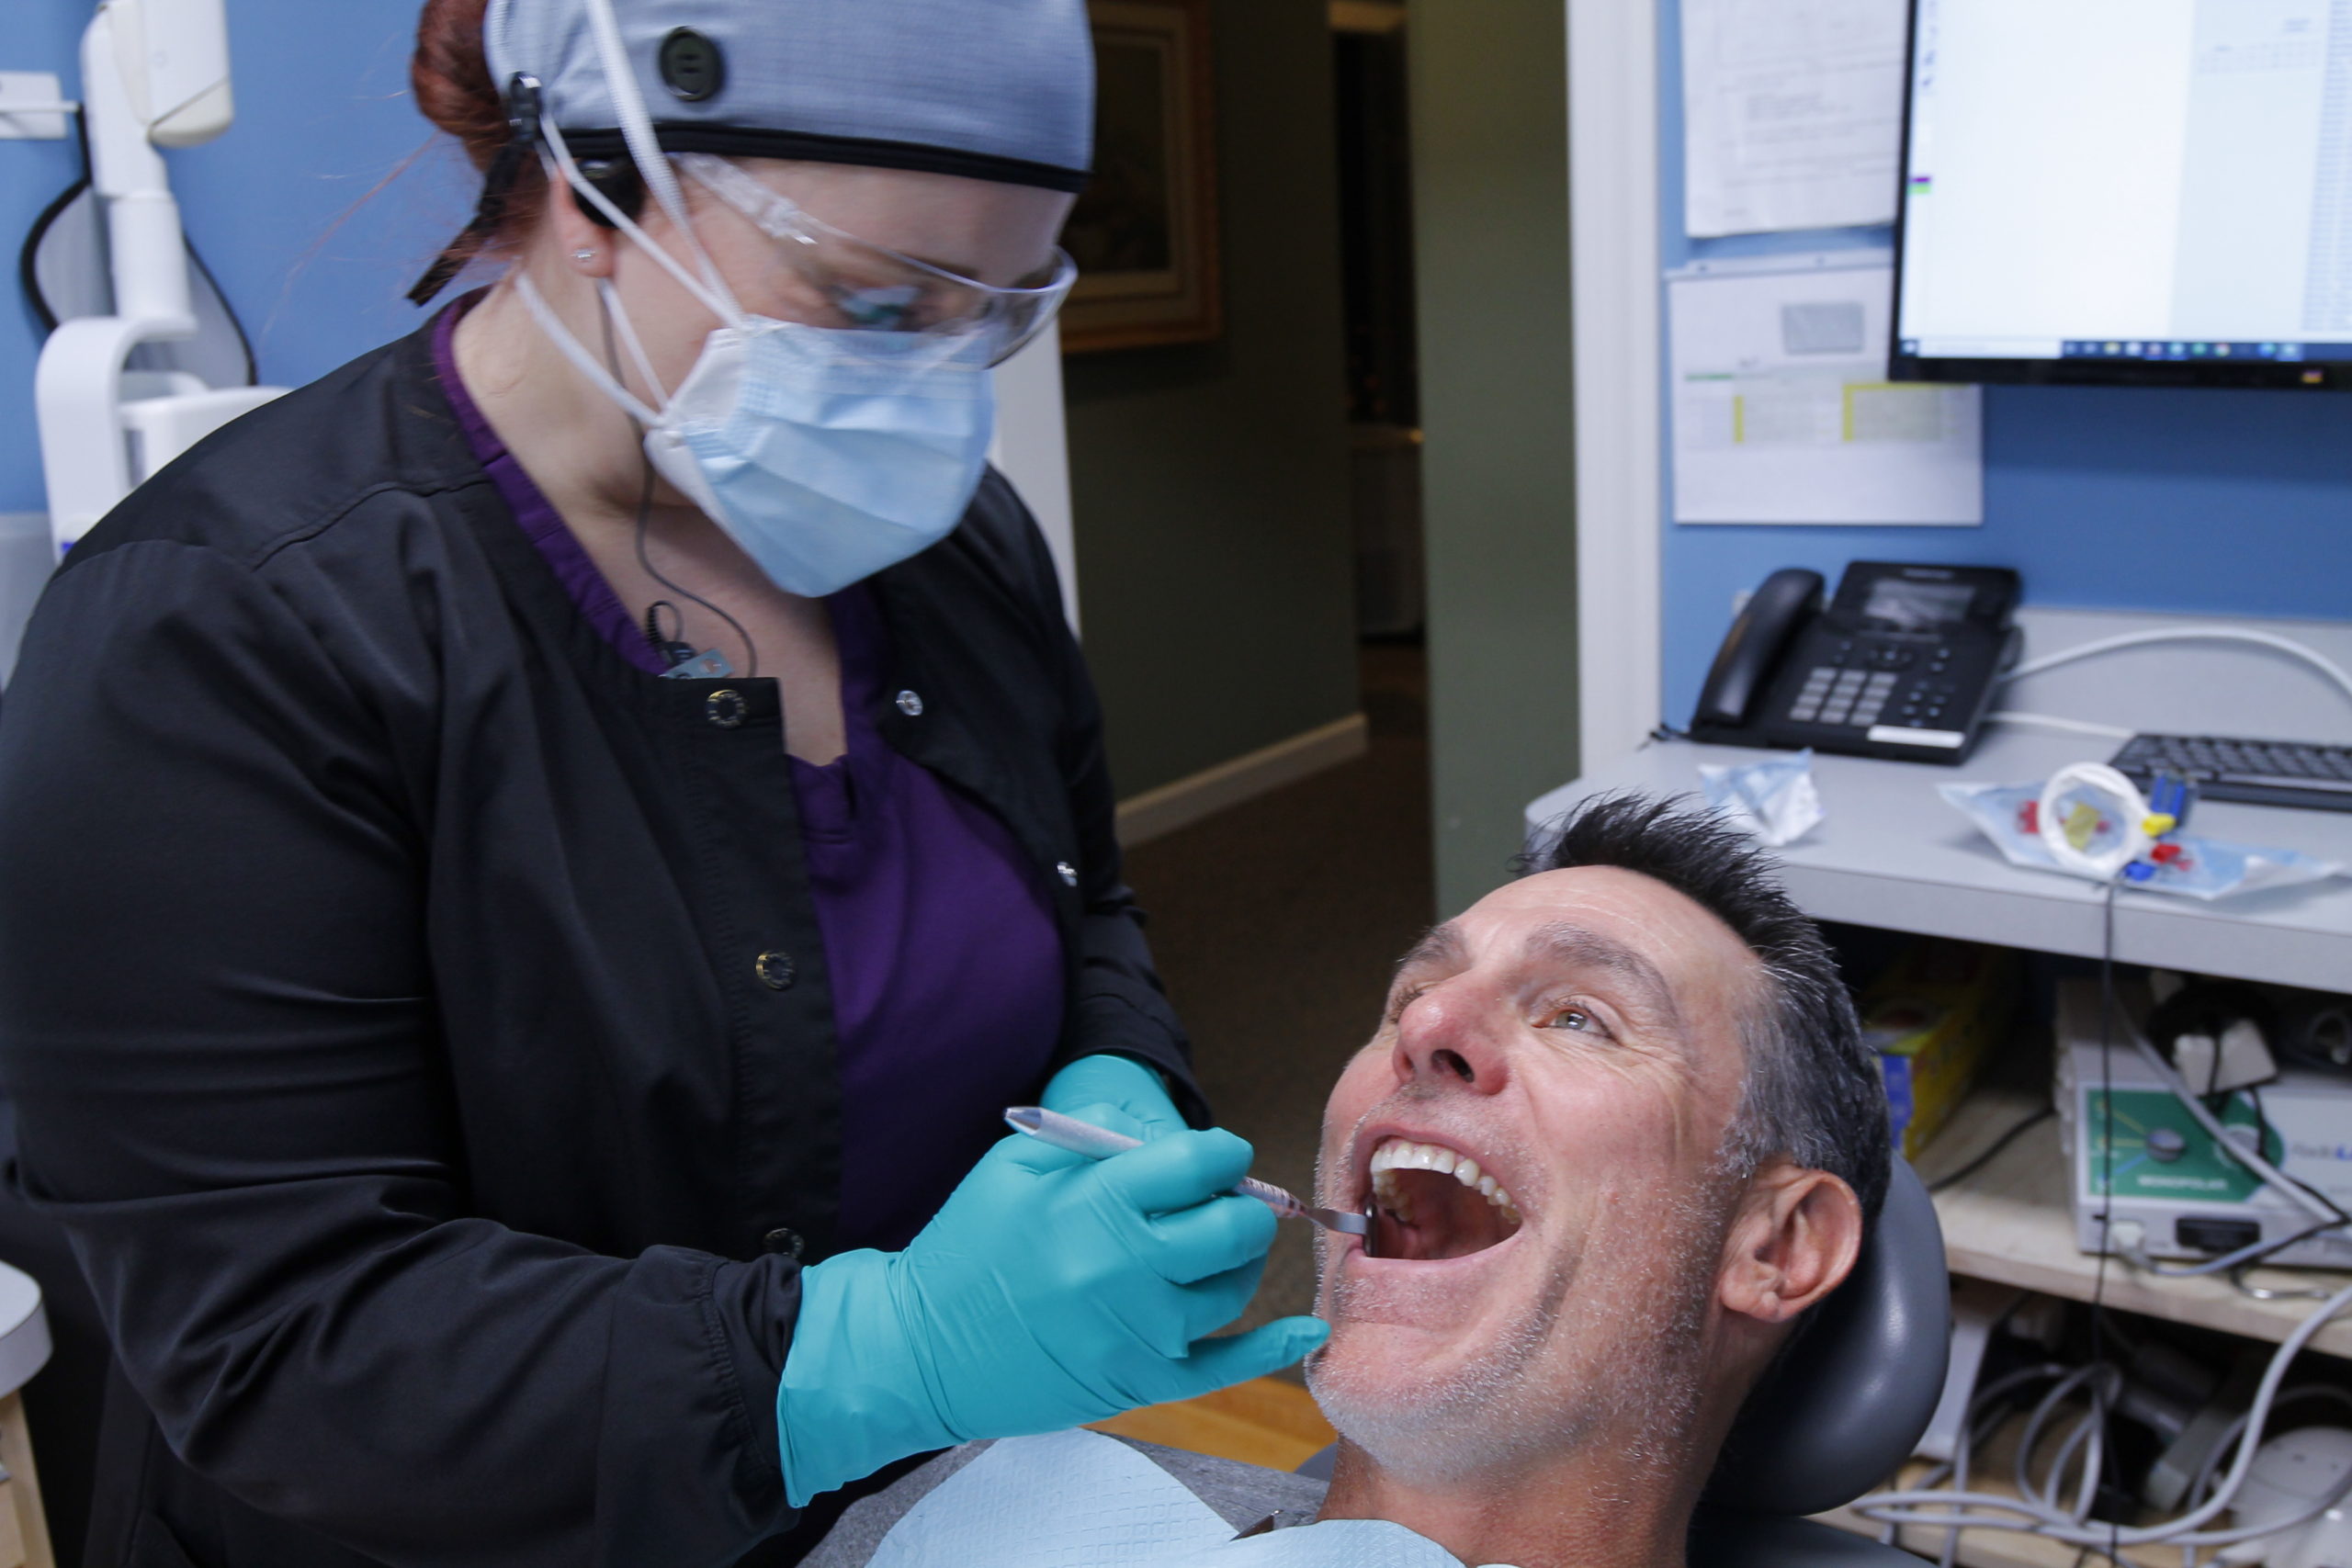 Jacksonville dentist warns that regular cleanings may lead to tooth loss for those with periodontal disease